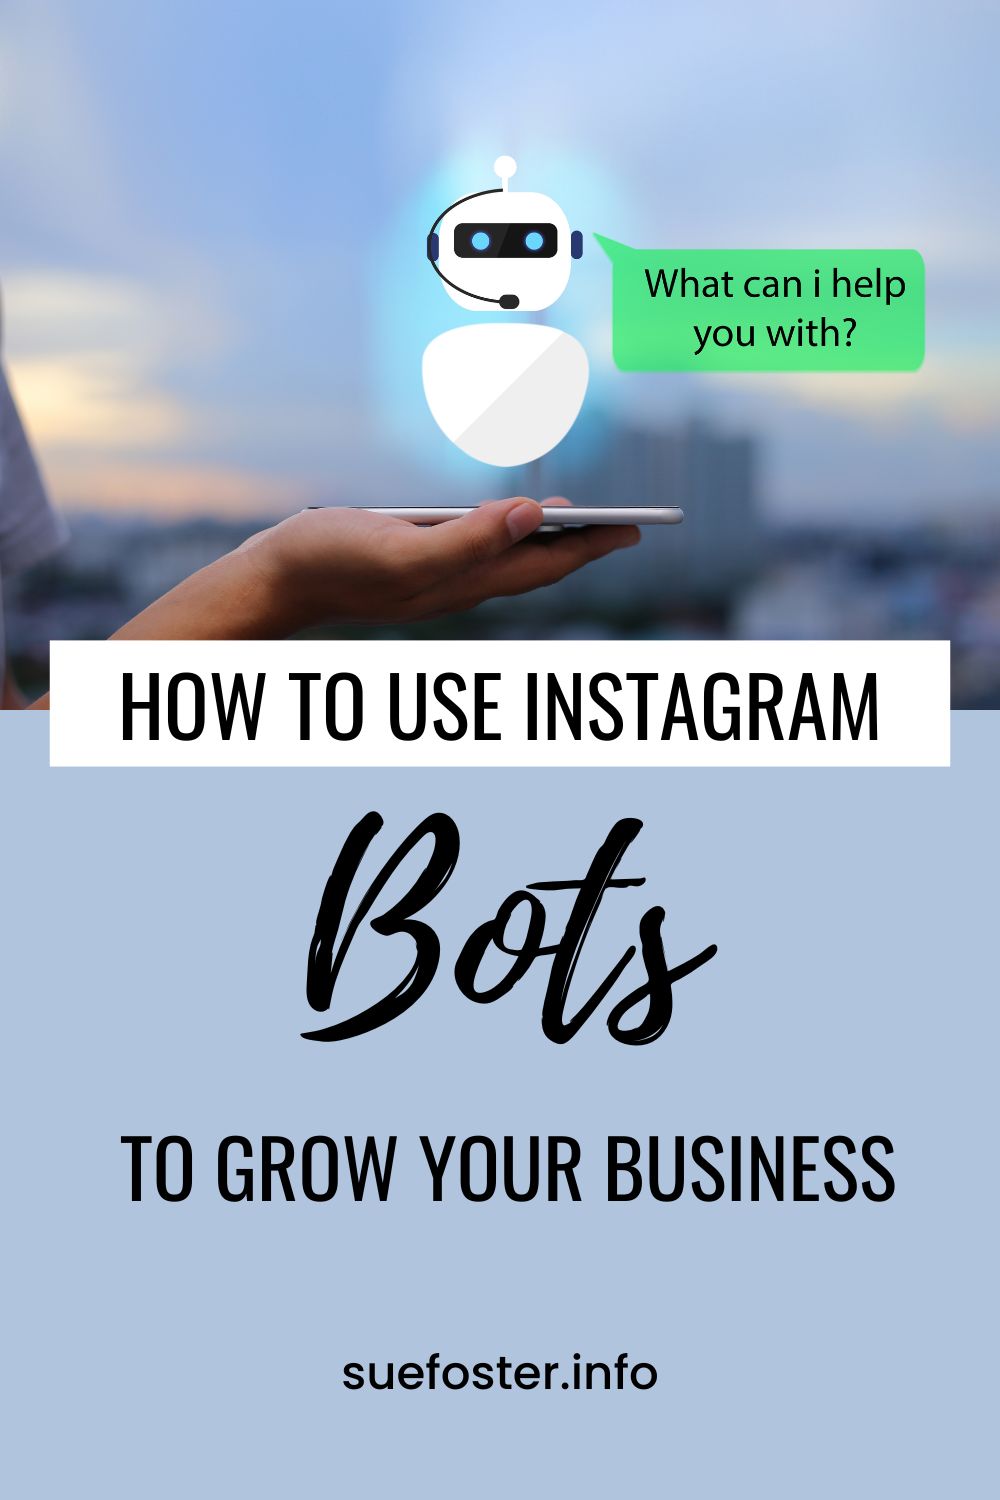 Using Instagram bots, you can automate your account and get more out of your profile and followers